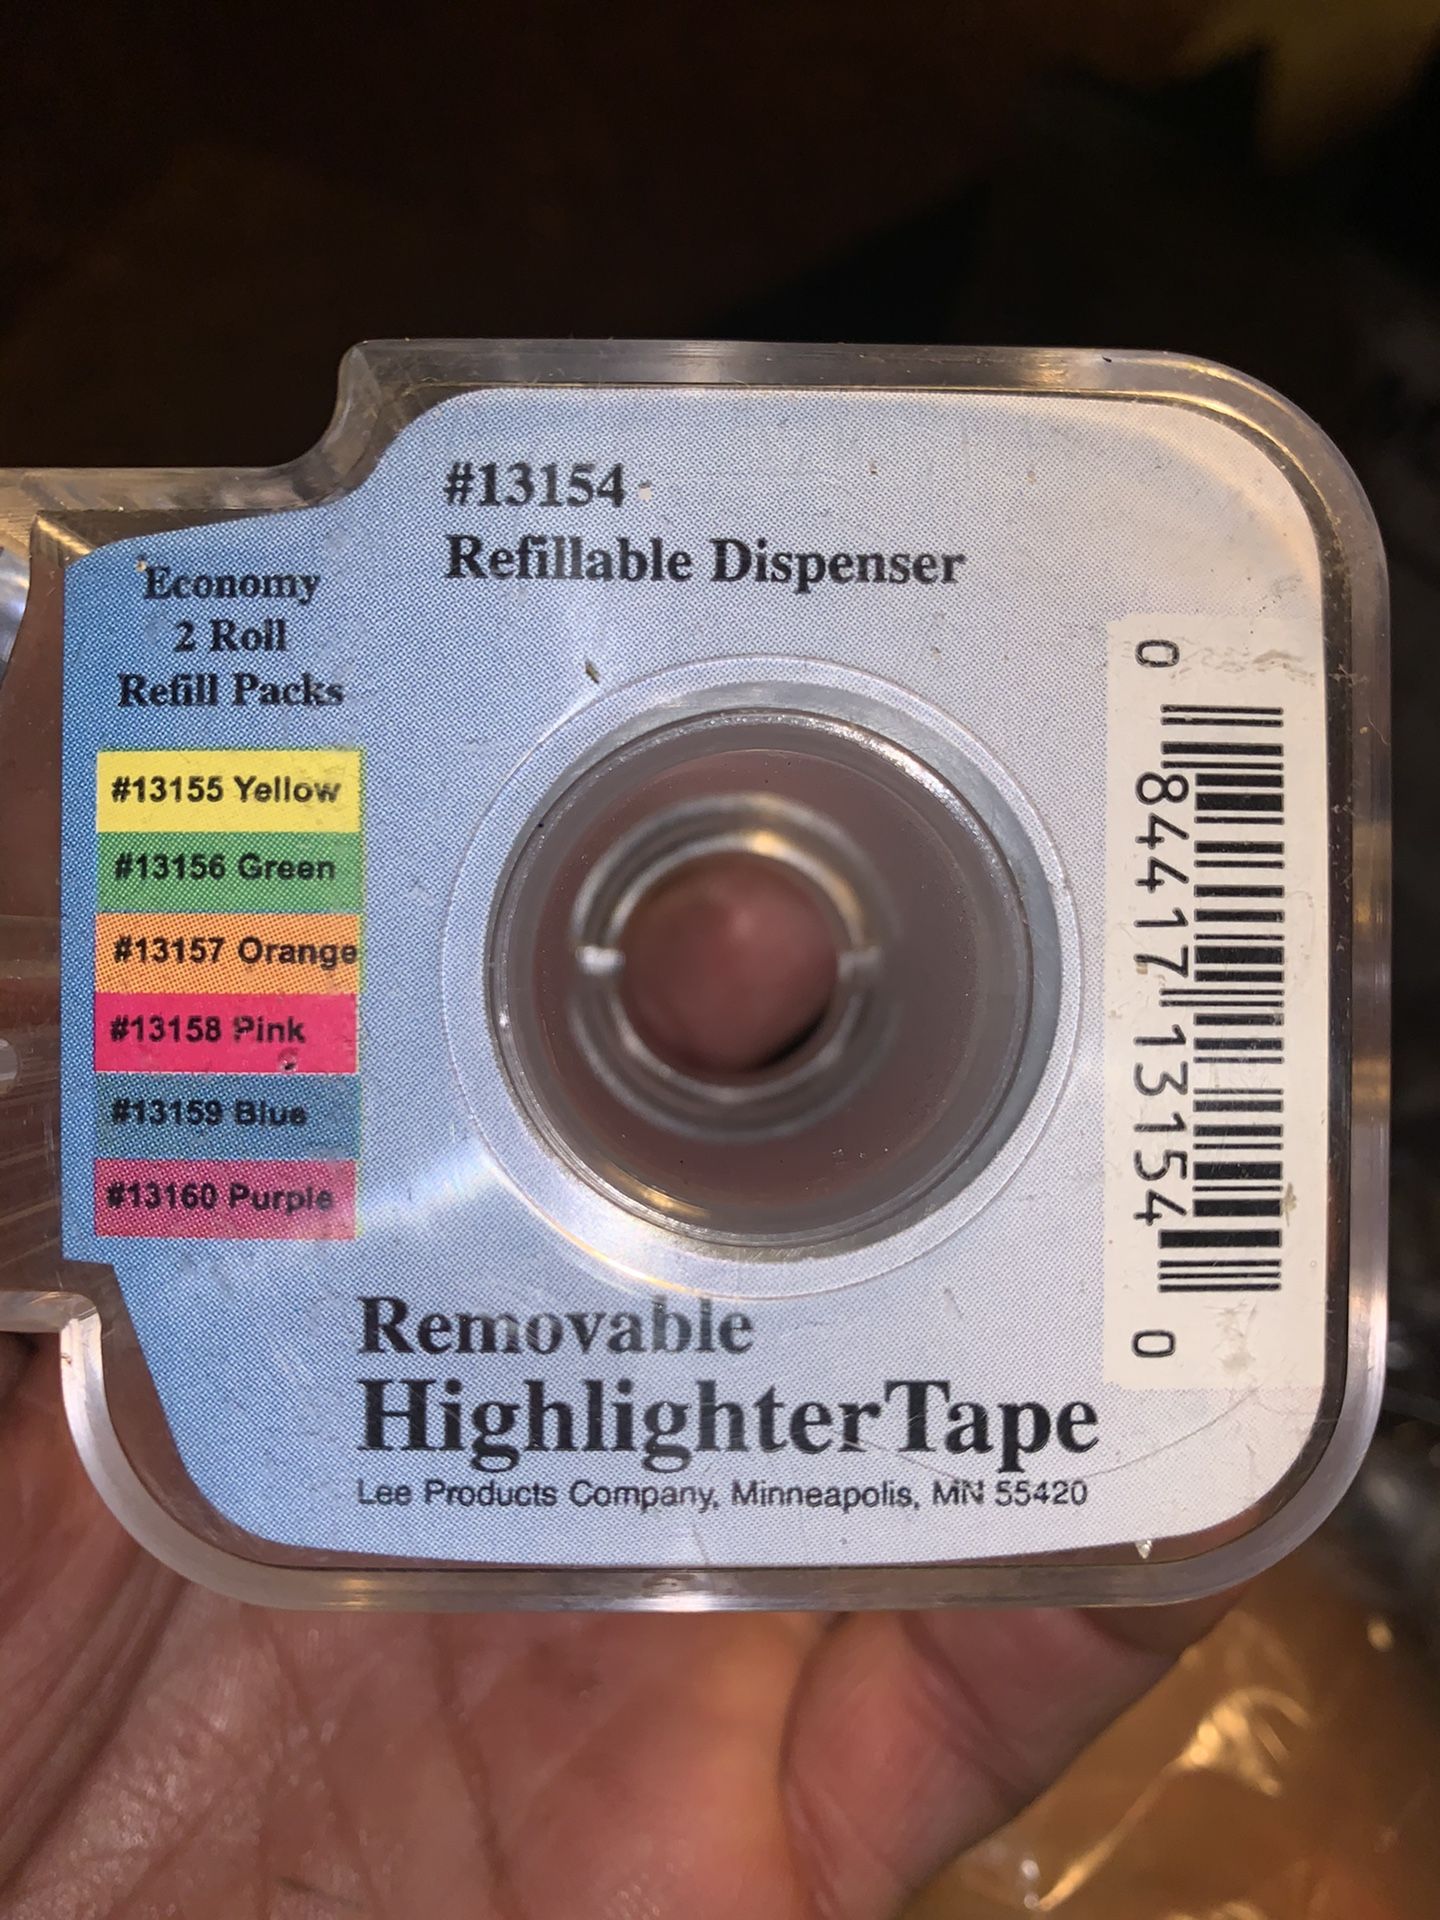 6 REMOVABLE HIGHLIGHTER TAPE ROLLS